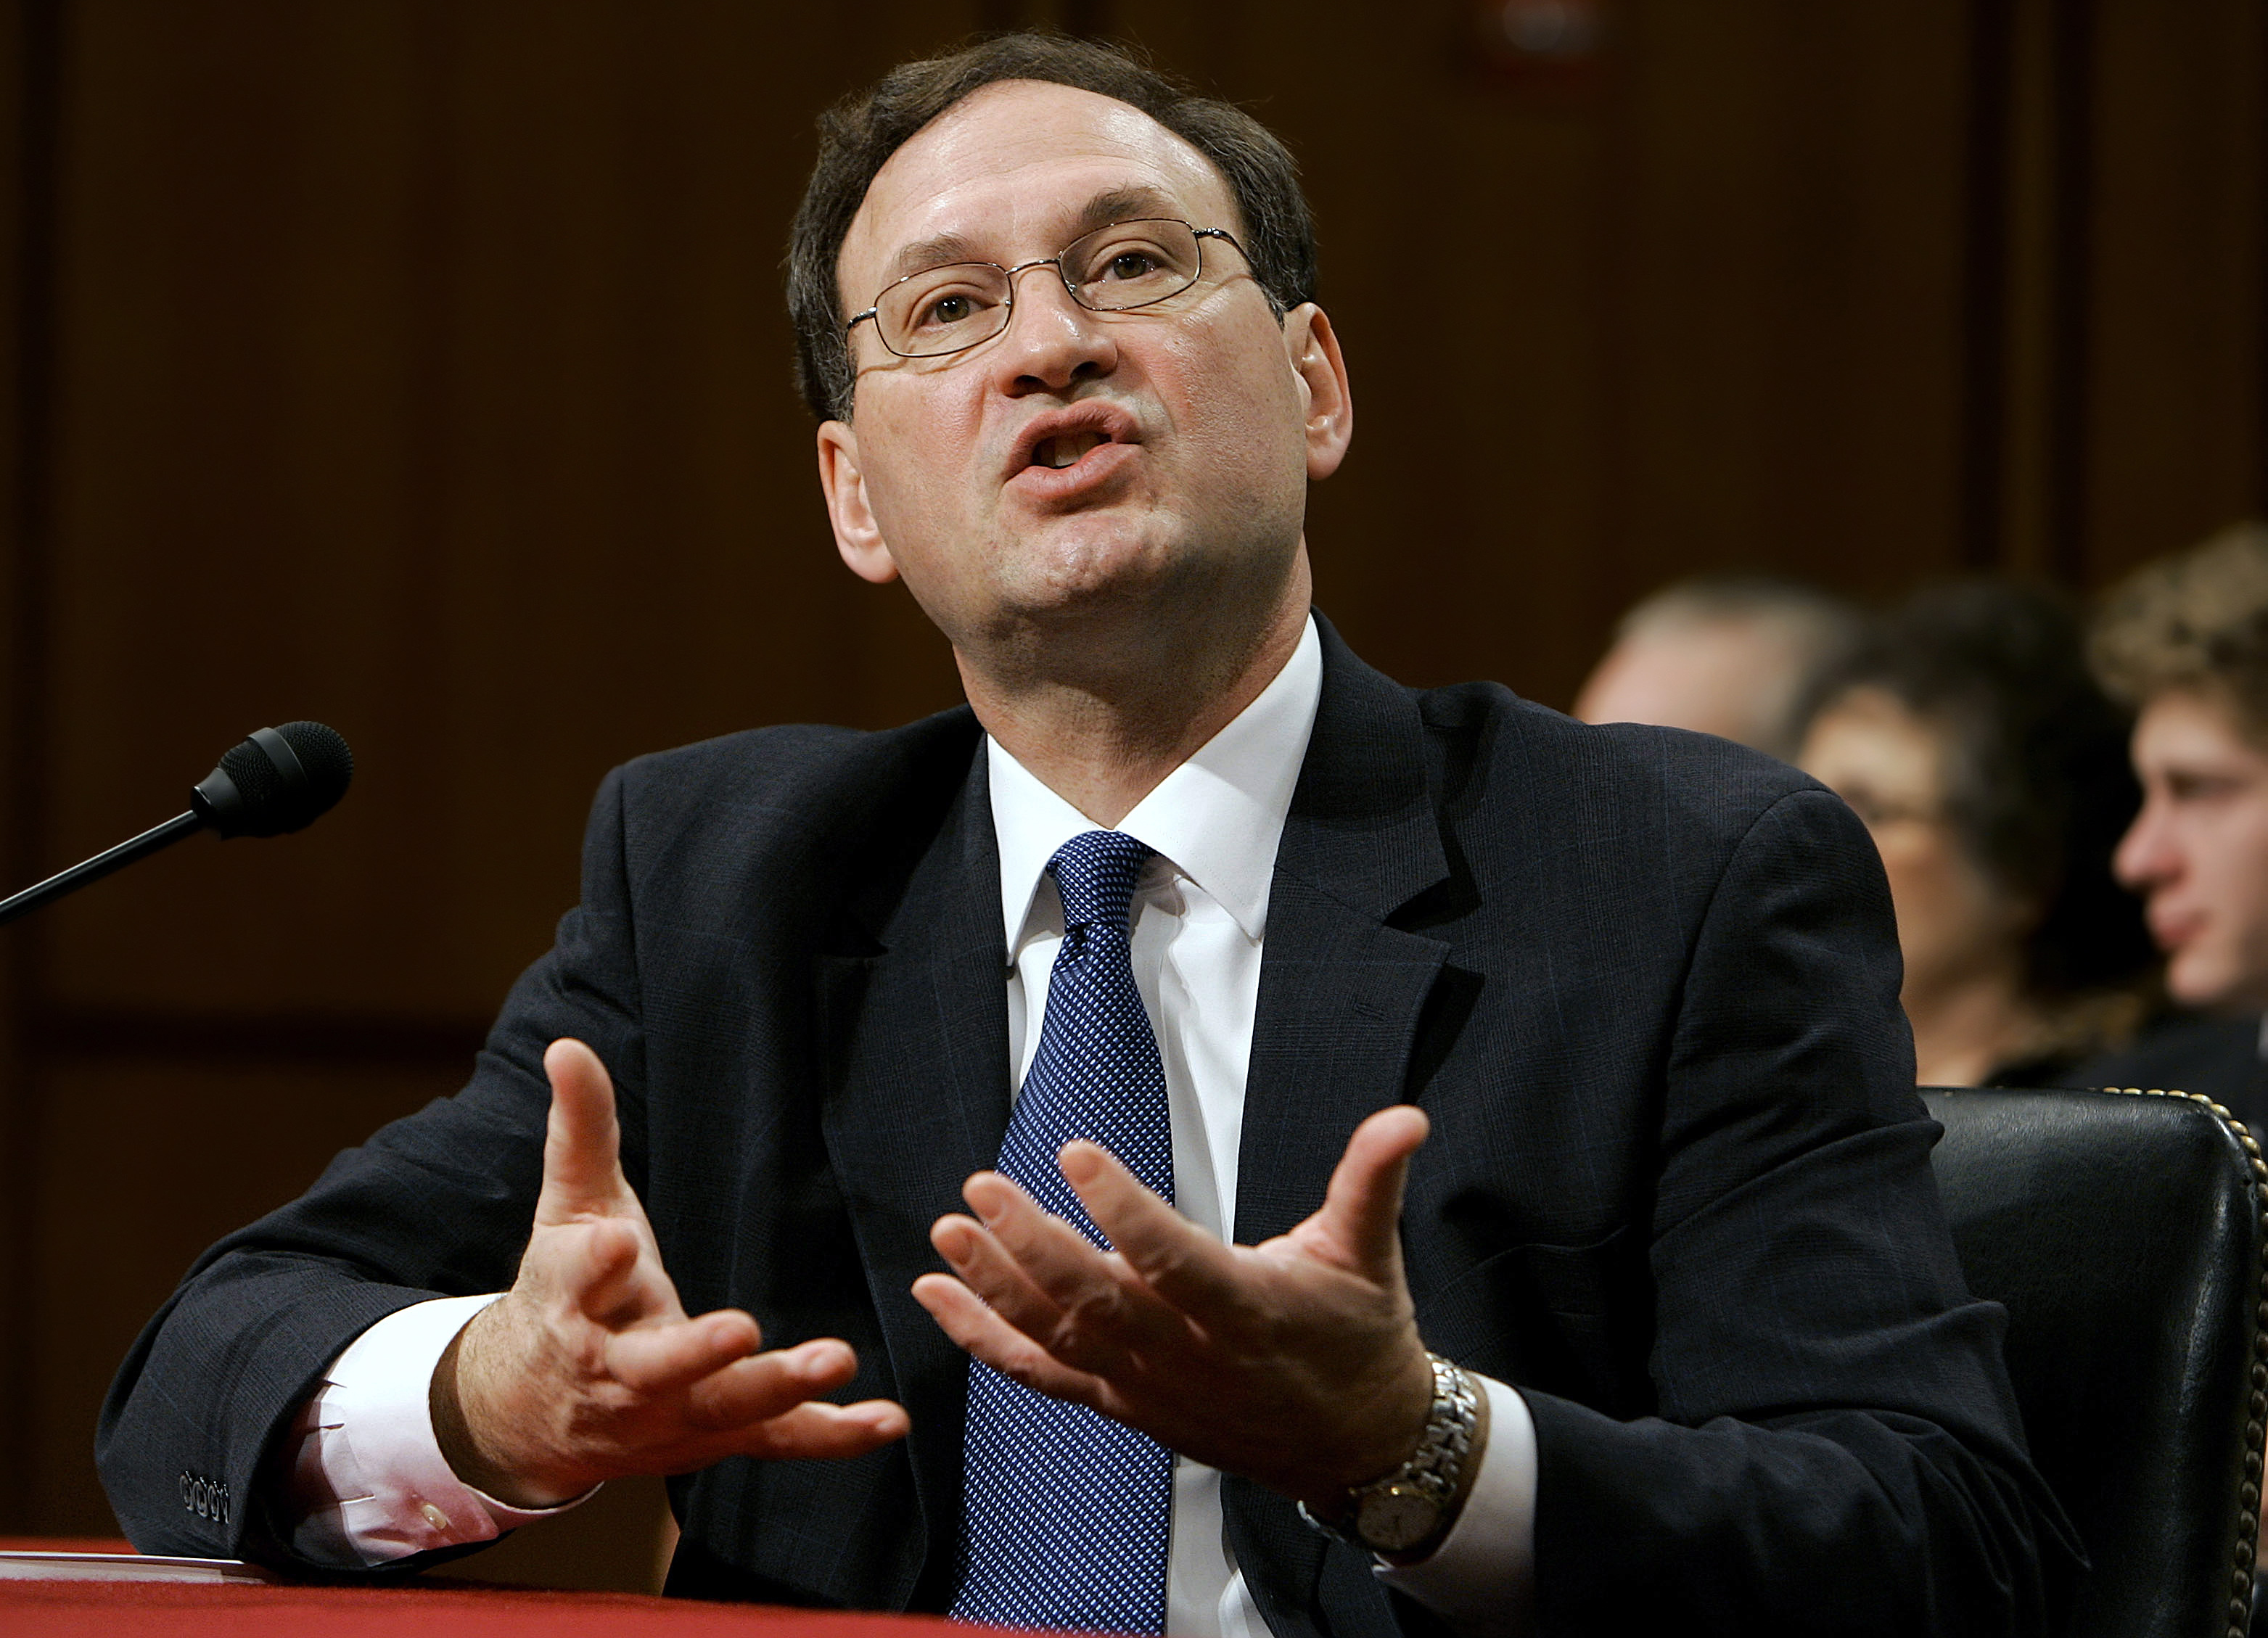 FILE - Supreme Court nominee Judge Samuel Alito answers a question on the third day of his confirmation hearings before the Senate Judiciary Committee on Capitol Hill in Washington, Jan. 11, 2006. In one form or another, every Supreme Court nominee is asked during Senate hearings about his or her views of the landmark abortion rights ruling that has stood for a half century. Now, a draft opinion obtained by Politico suggests that a majority of the court is prepared to strike down the Roe v. Wade decision from 1973, leaving it to the states to determine a woman’s ability to get an abortion. (AP Photo/Susan Walsh, File)